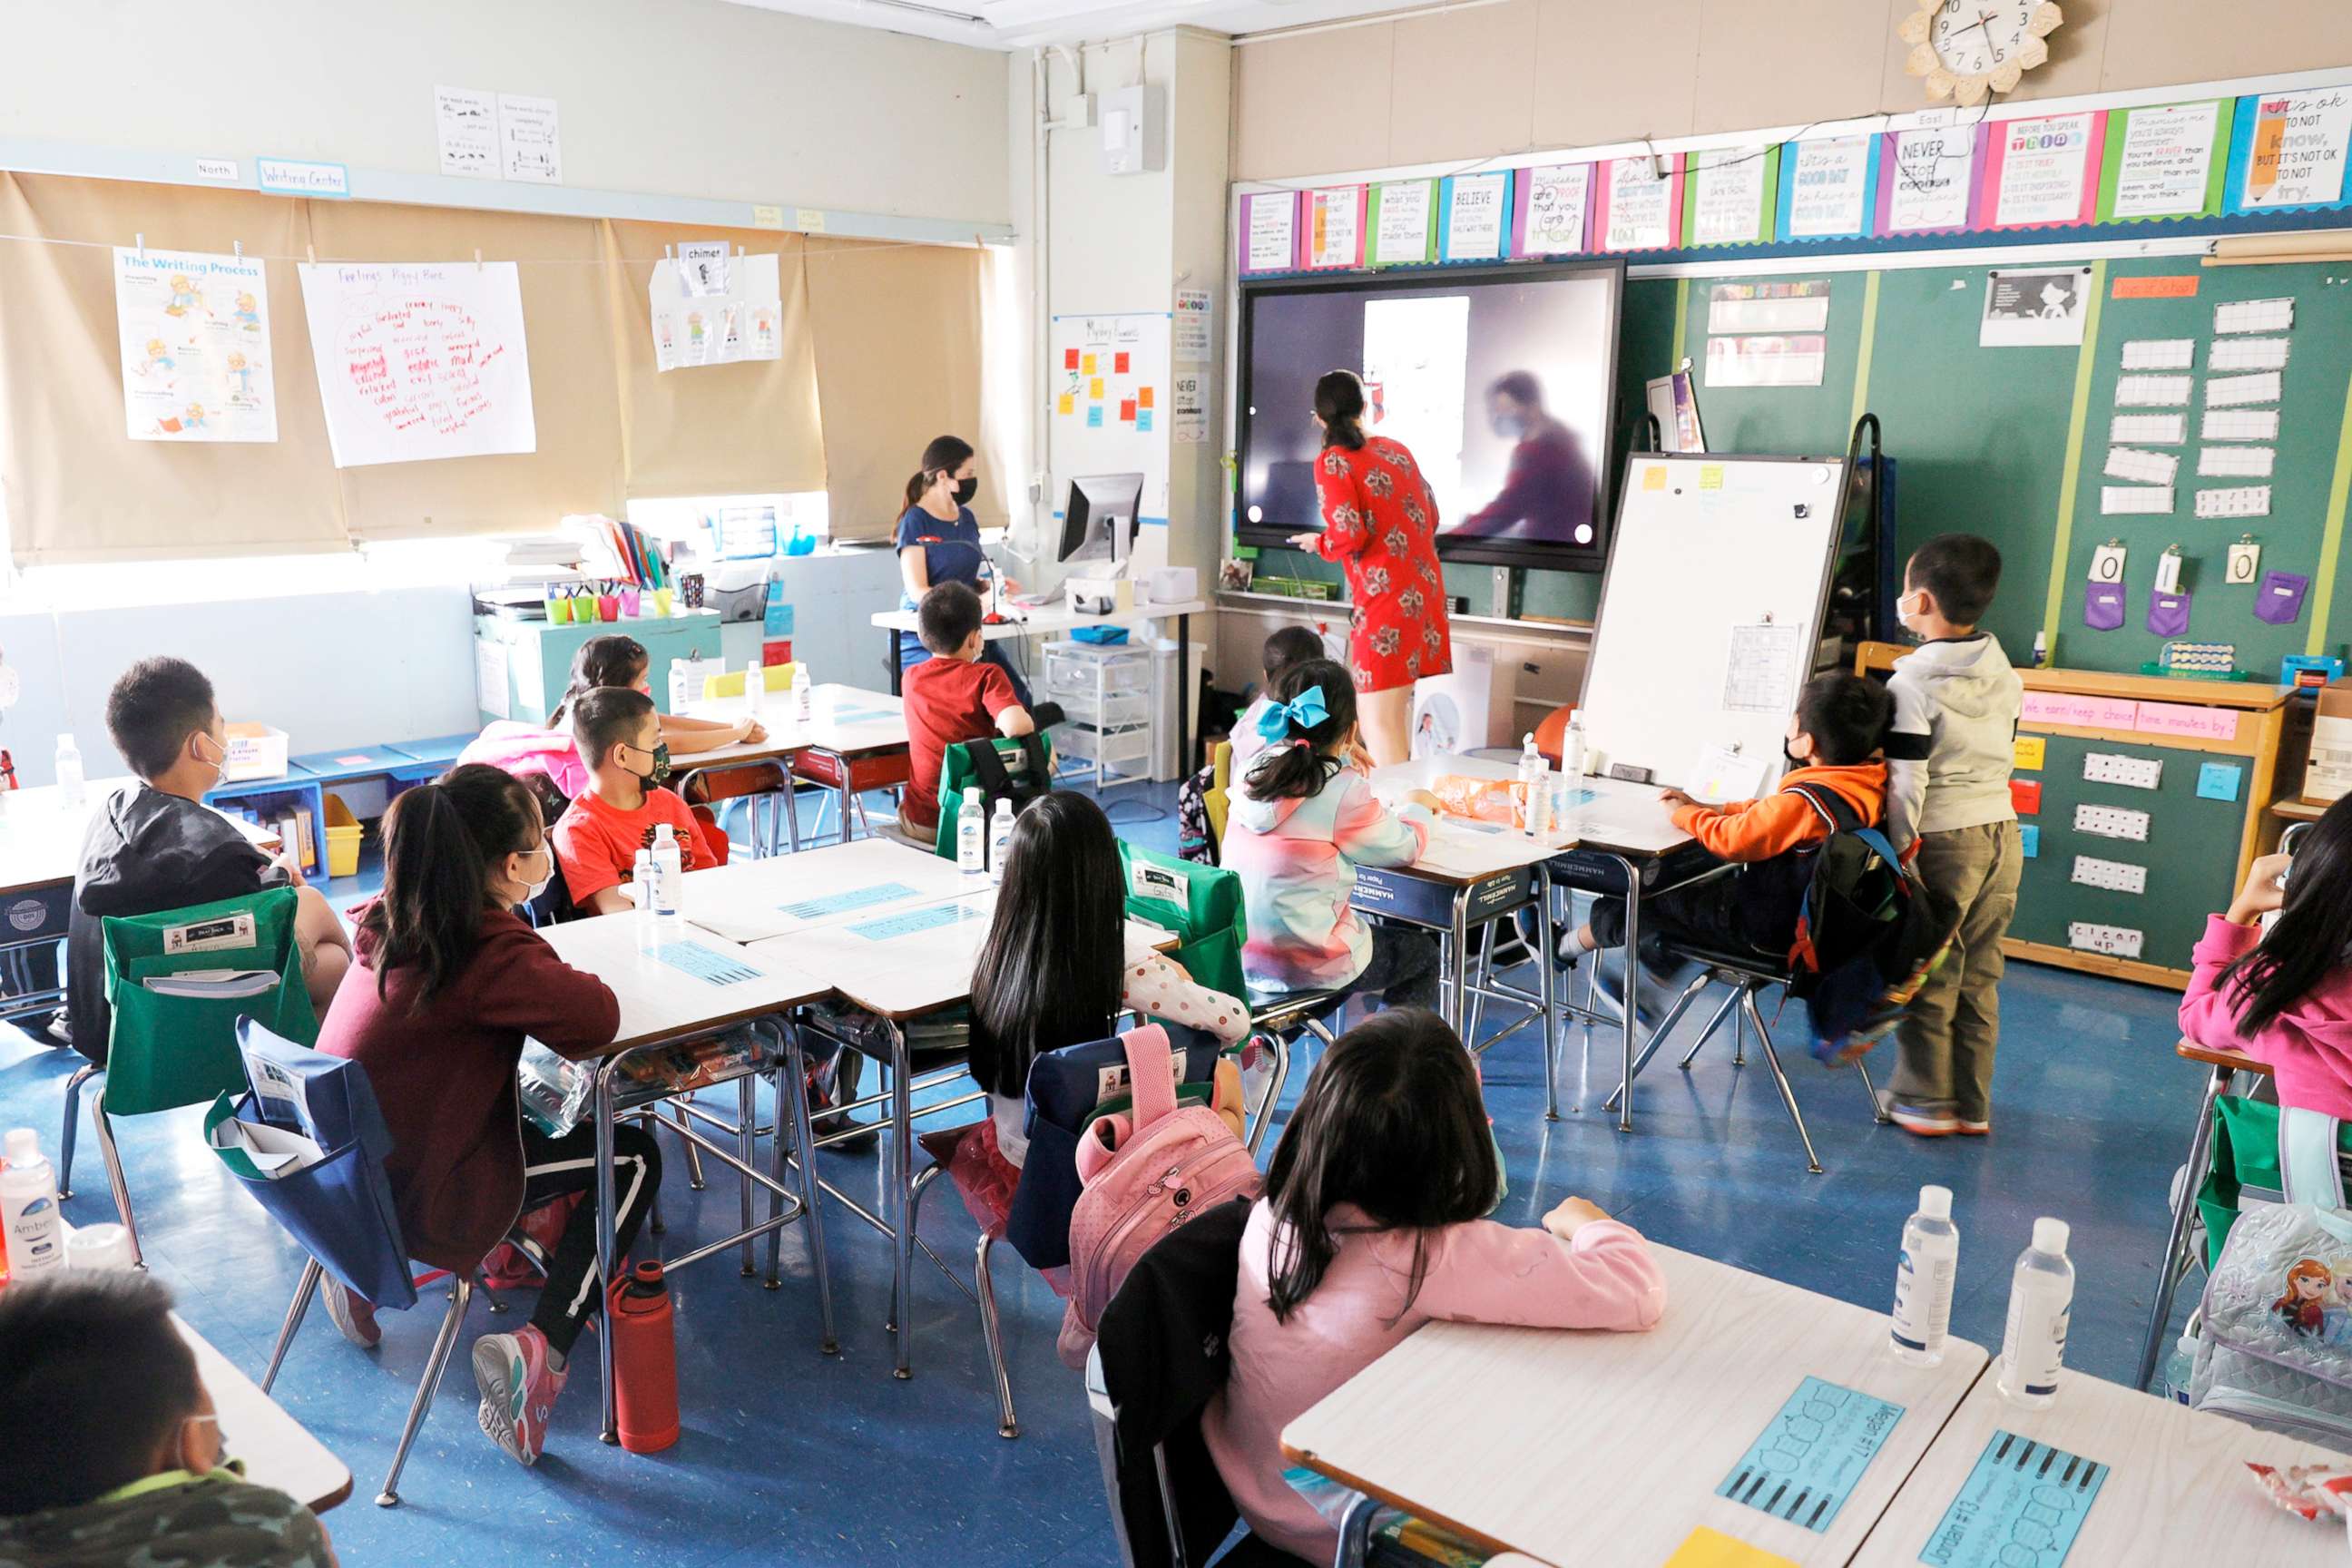 PHOTO: Students are instructed in a classroom in a New York, Sept. 27, 2021.